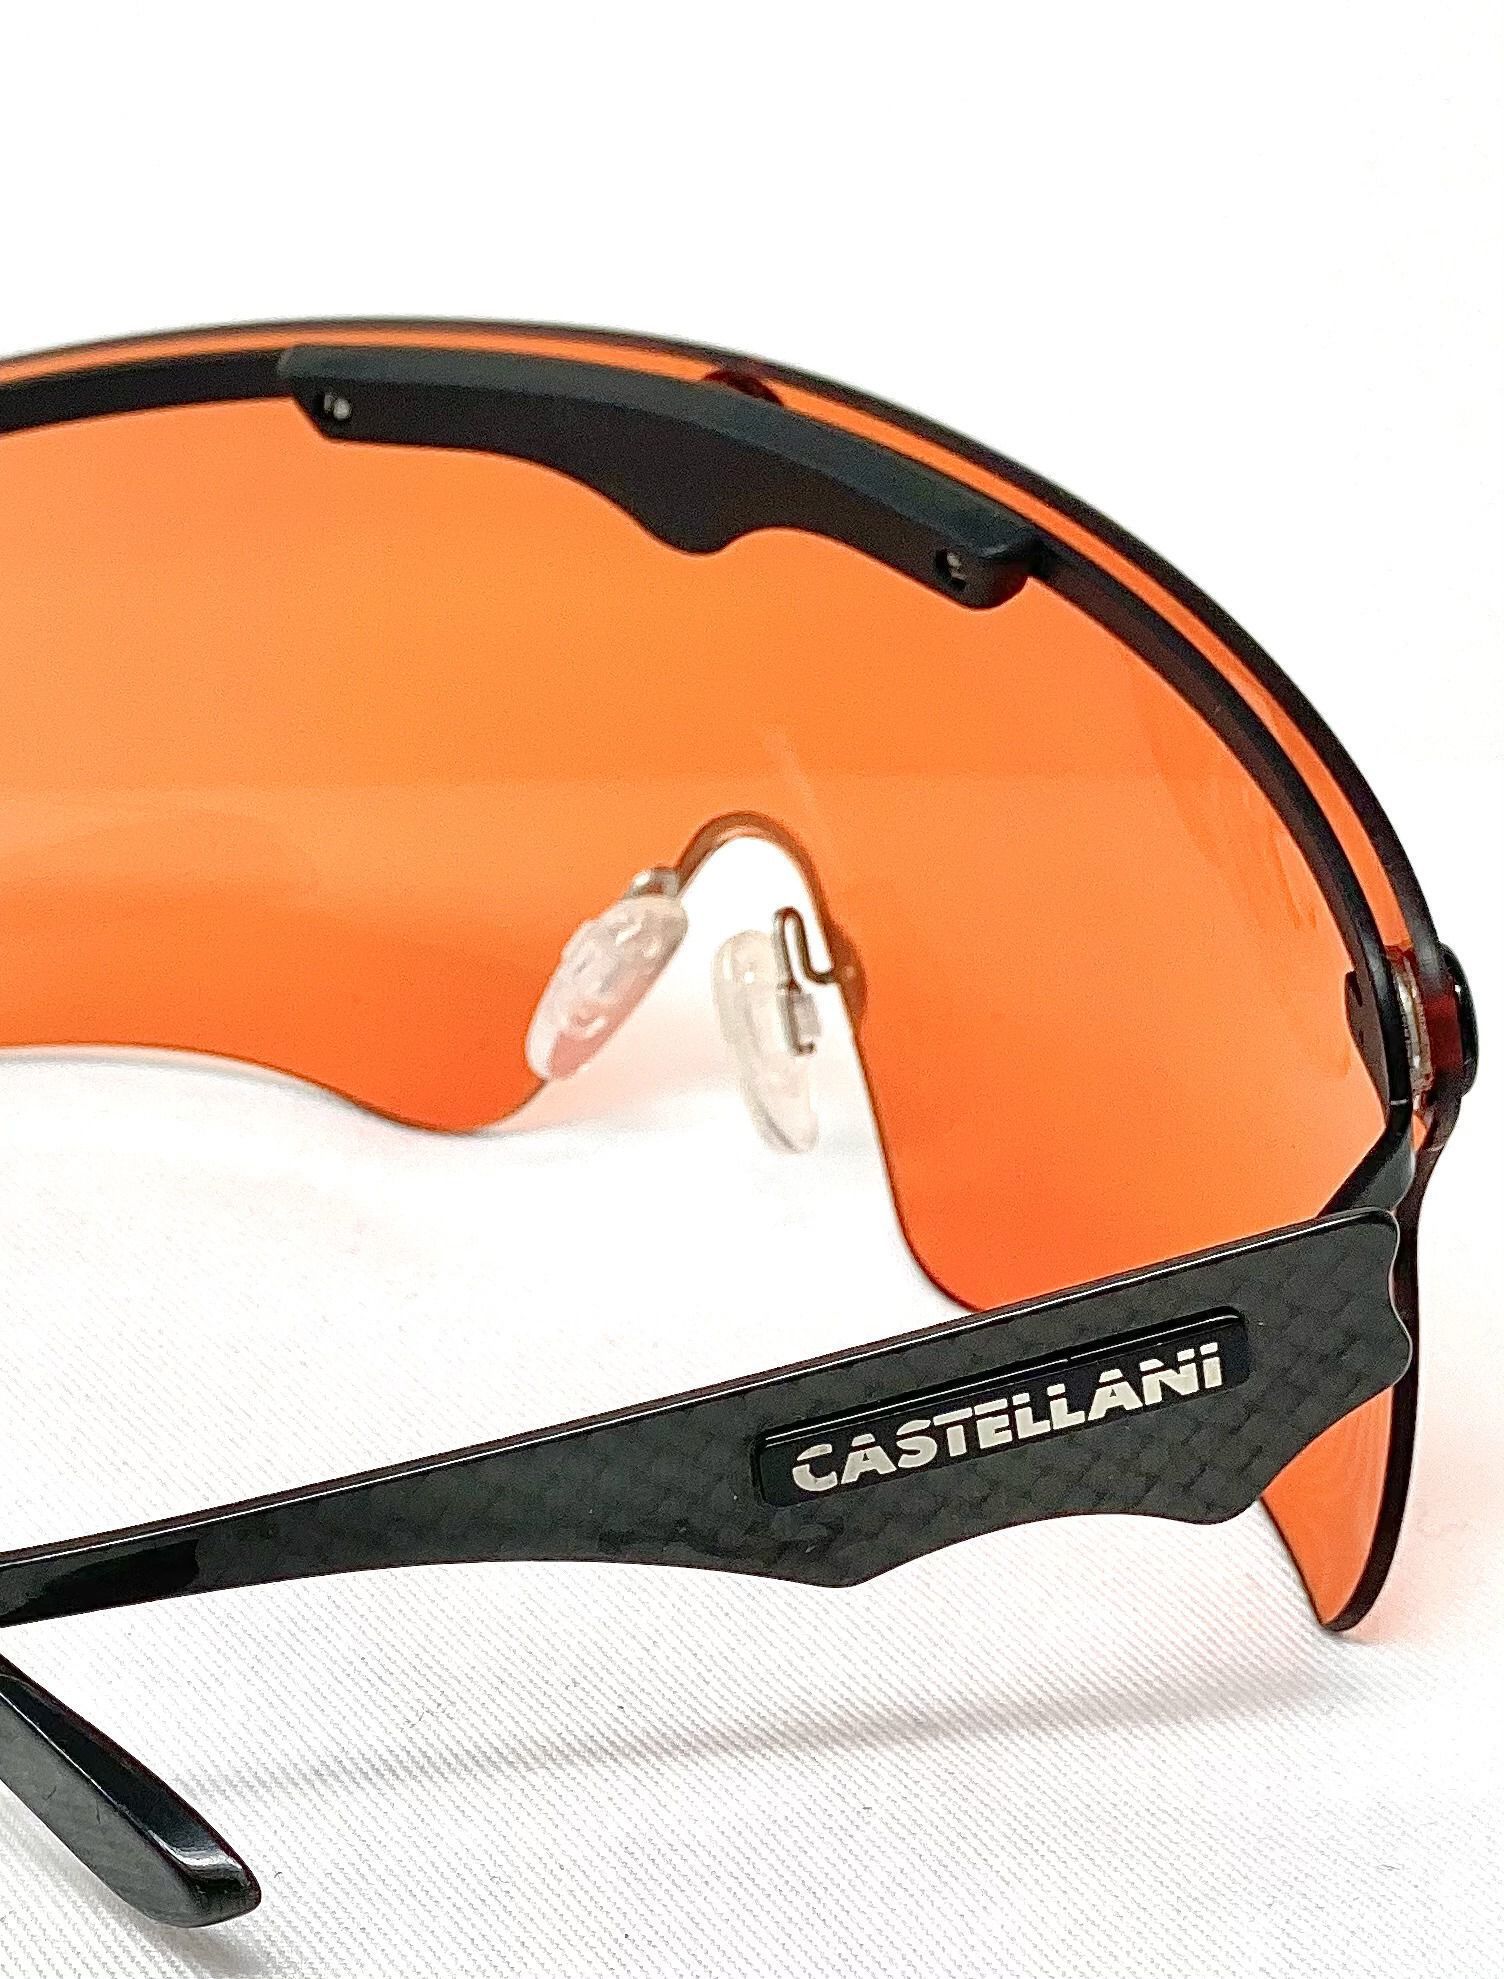 Castellani C-mask pro shooting glasses with removable sweatbar.